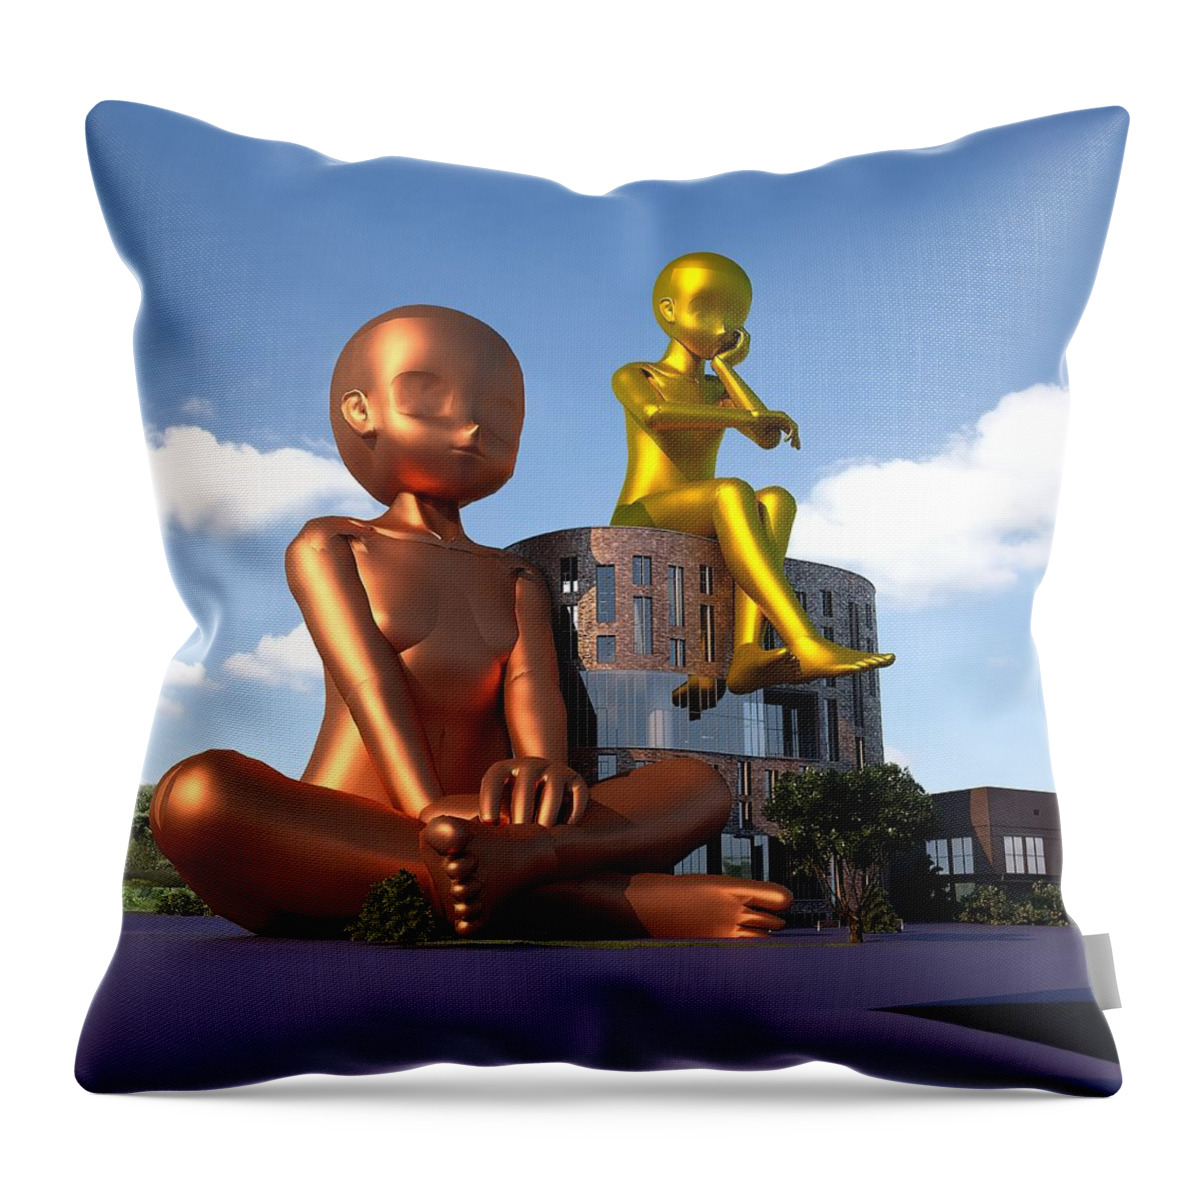  Throw Pillow featuring the digital art This is all way too big #2 by Kurt Heppke